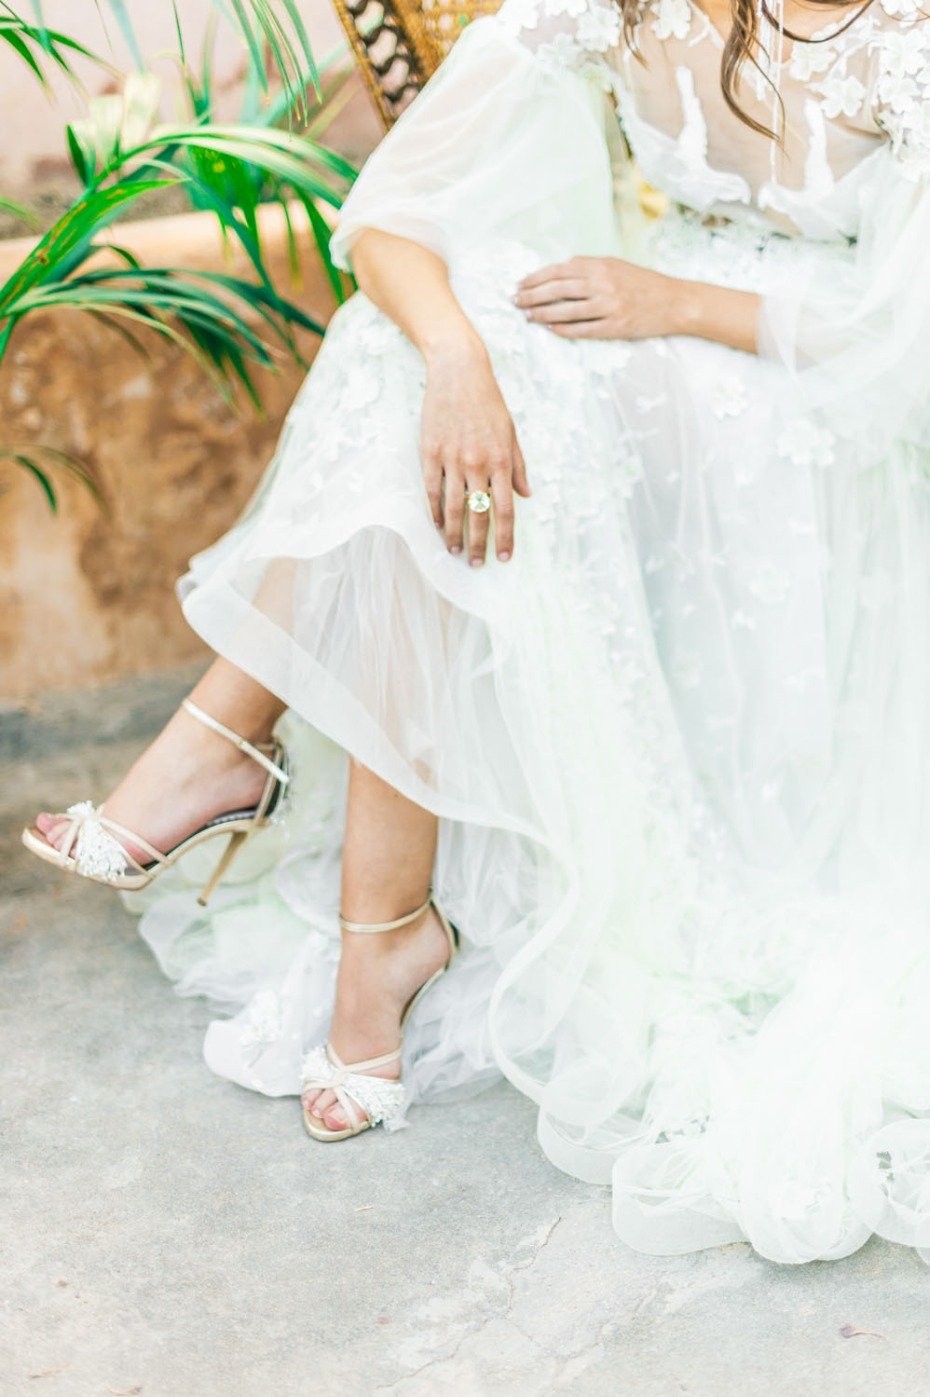 Wedding shoes and ring